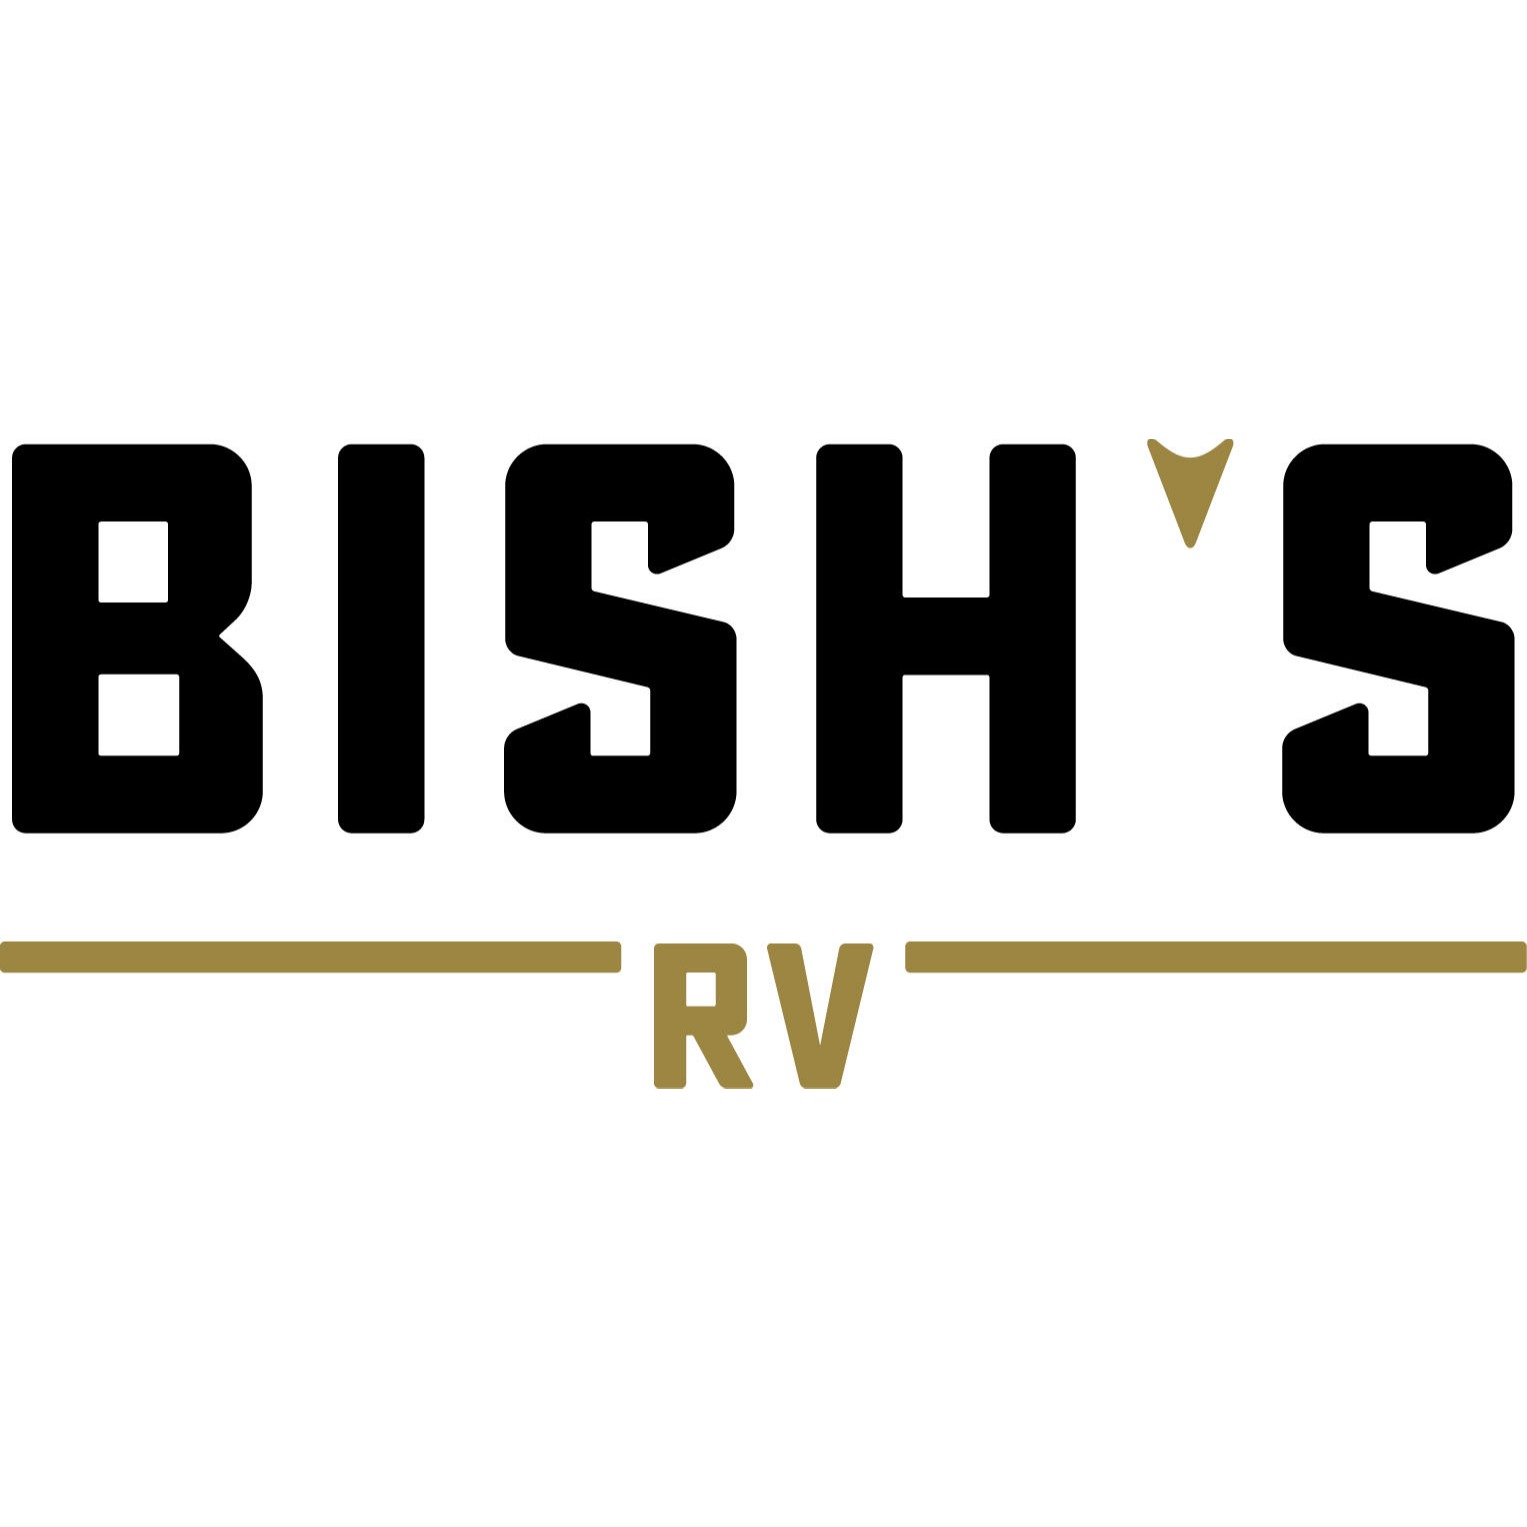 Bish's RV of Lincoln